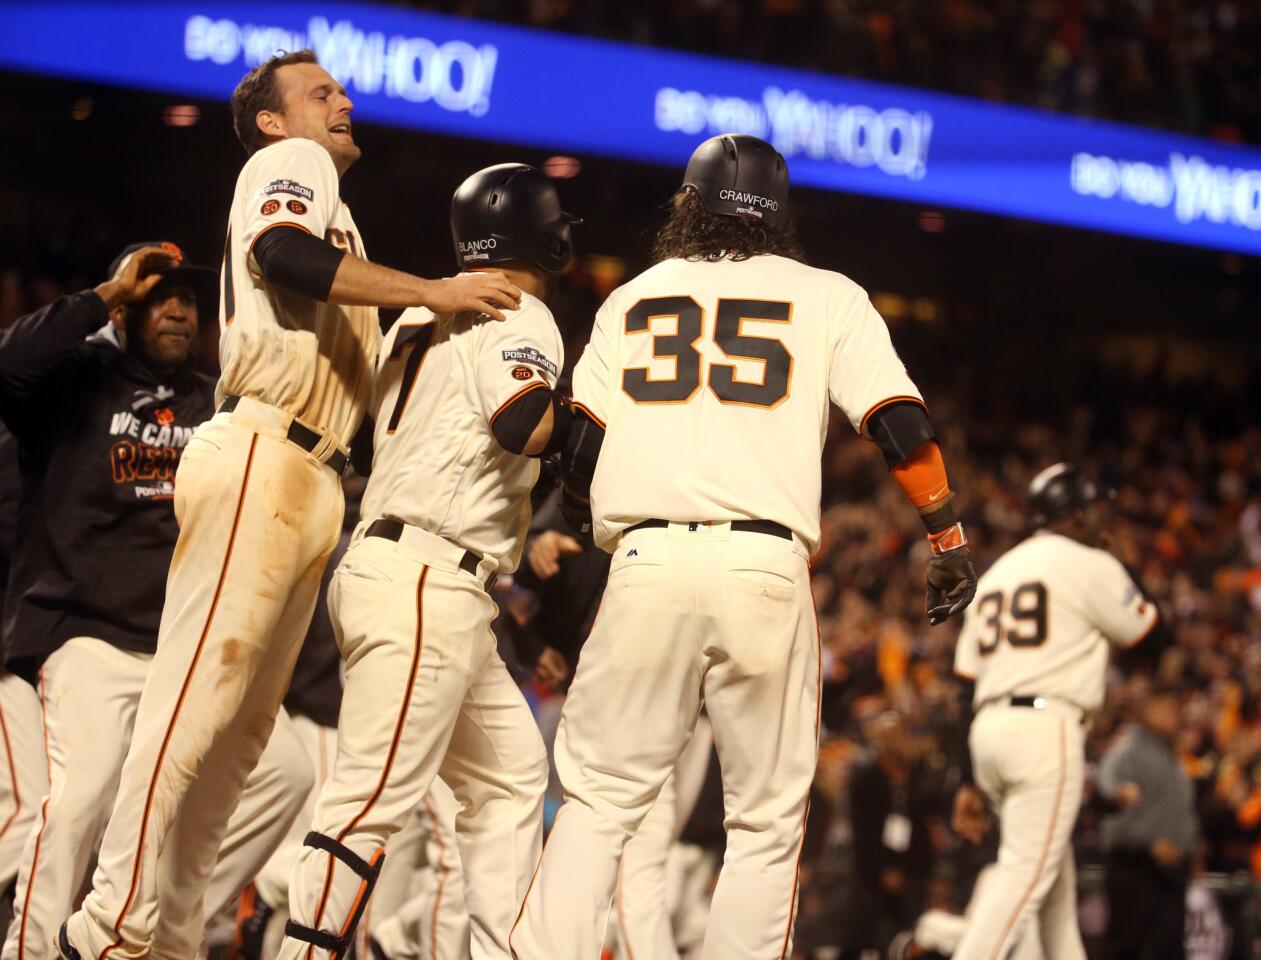 Giants third baseman Conor Gillaspie (left) and teammates celebrate their win in the thirteenth inning over the Cubs on Tuesday, Oct. 11, 2016 in Game 3 of their National League Division Series at AT&T Park in San Francisco.